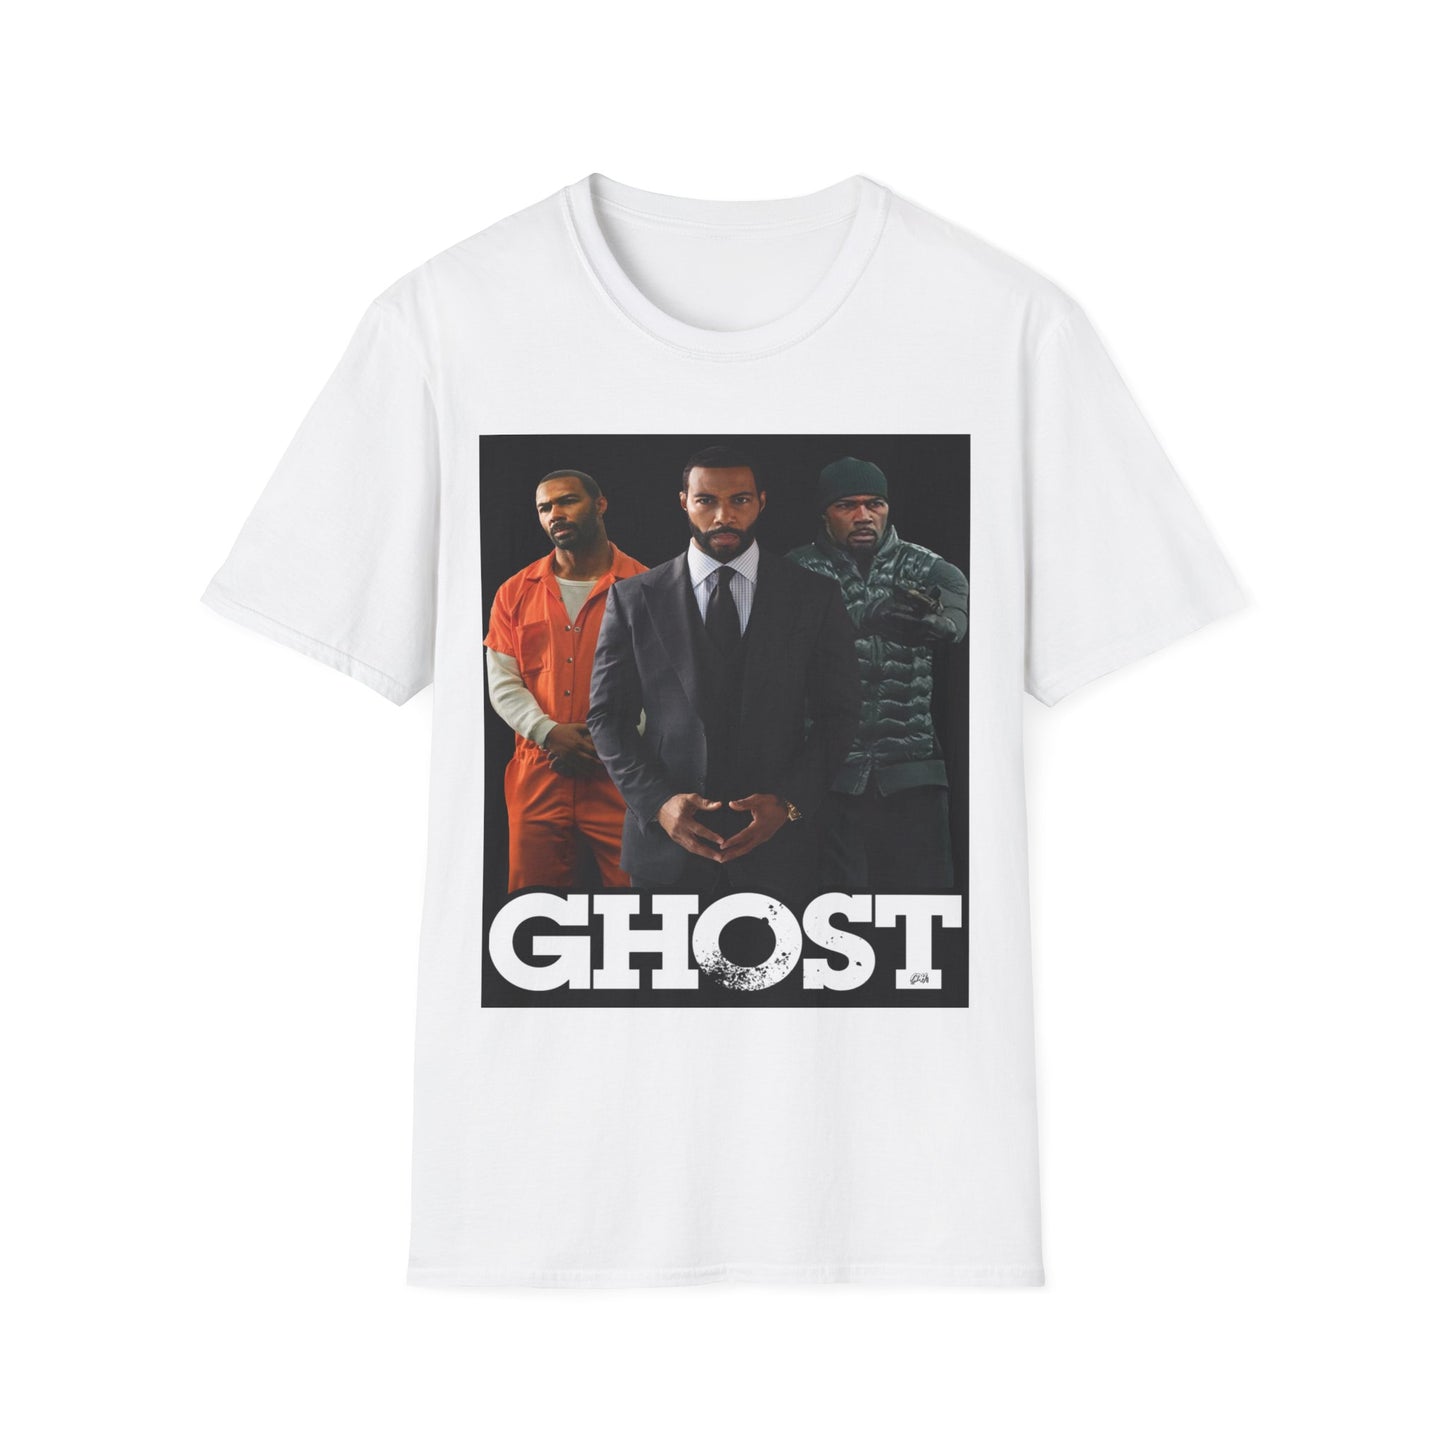 Power Universe Ghos Tee Unisex Softstyle T-Shirt